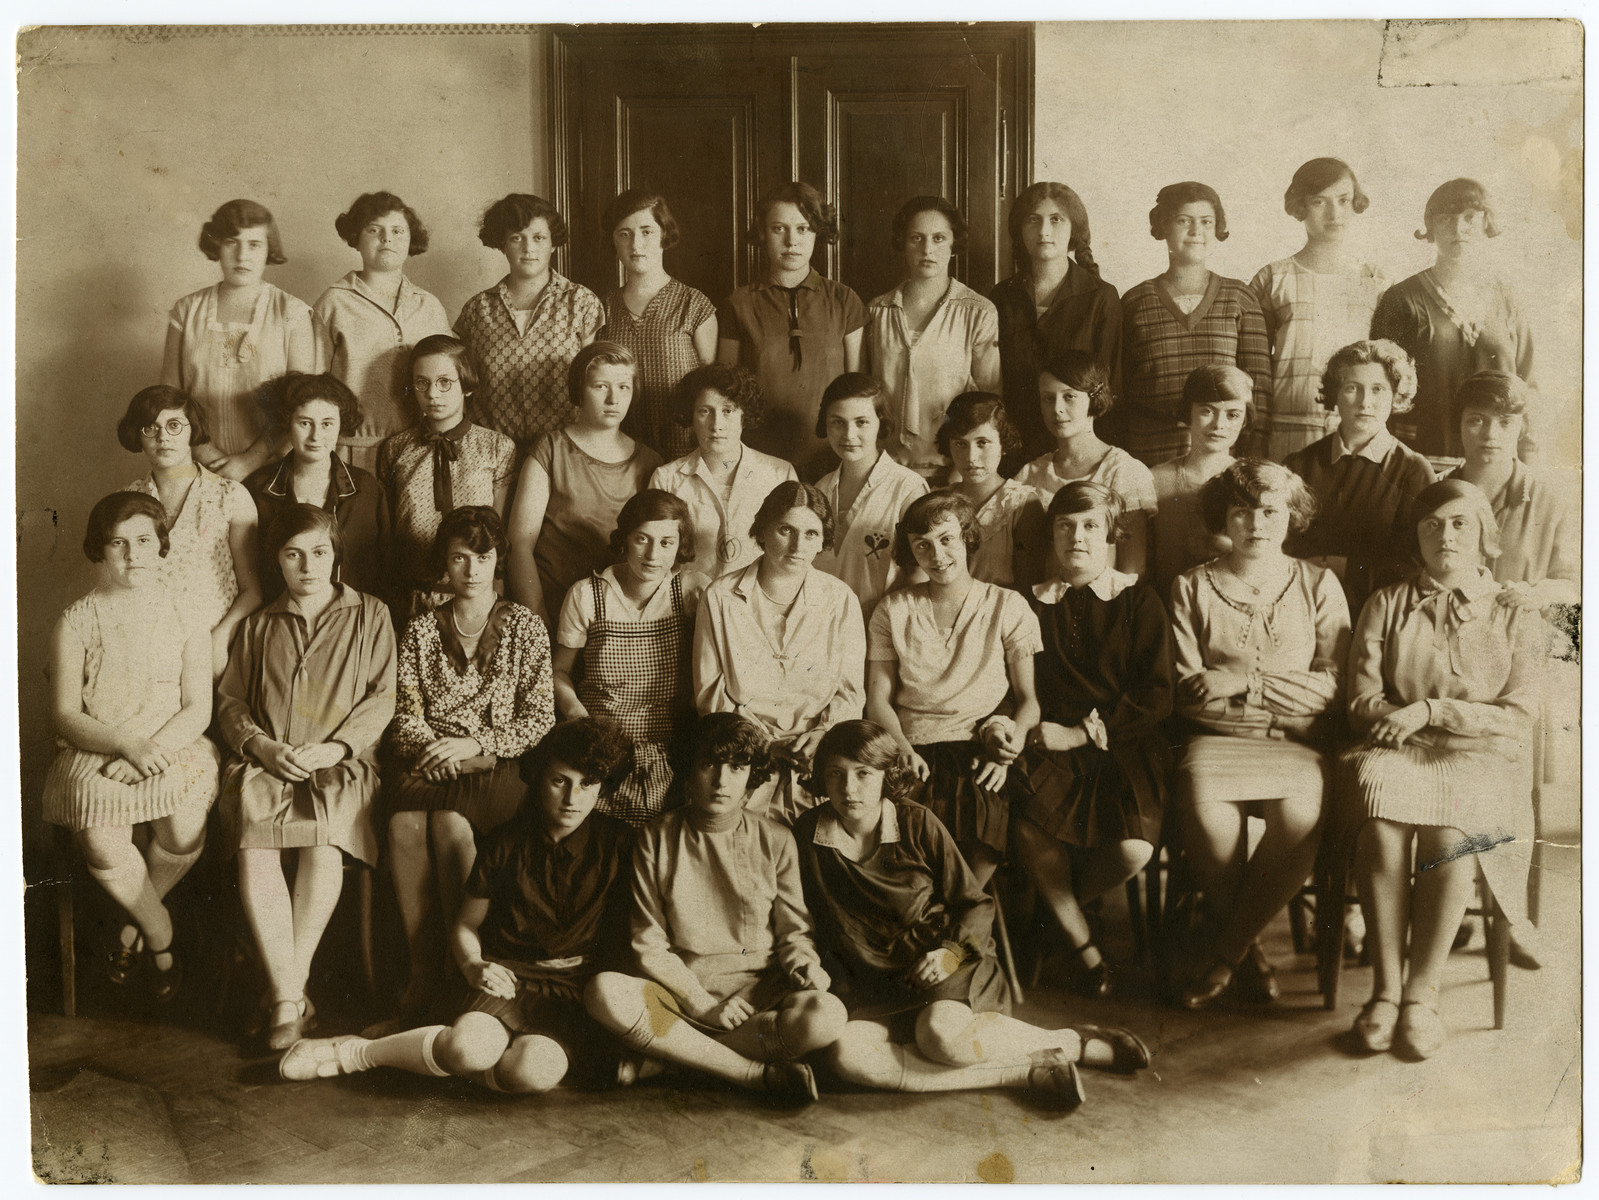 Group portrait of teenage girls in a school in Vienna.

Dora Austein in pictured in the front, middle.